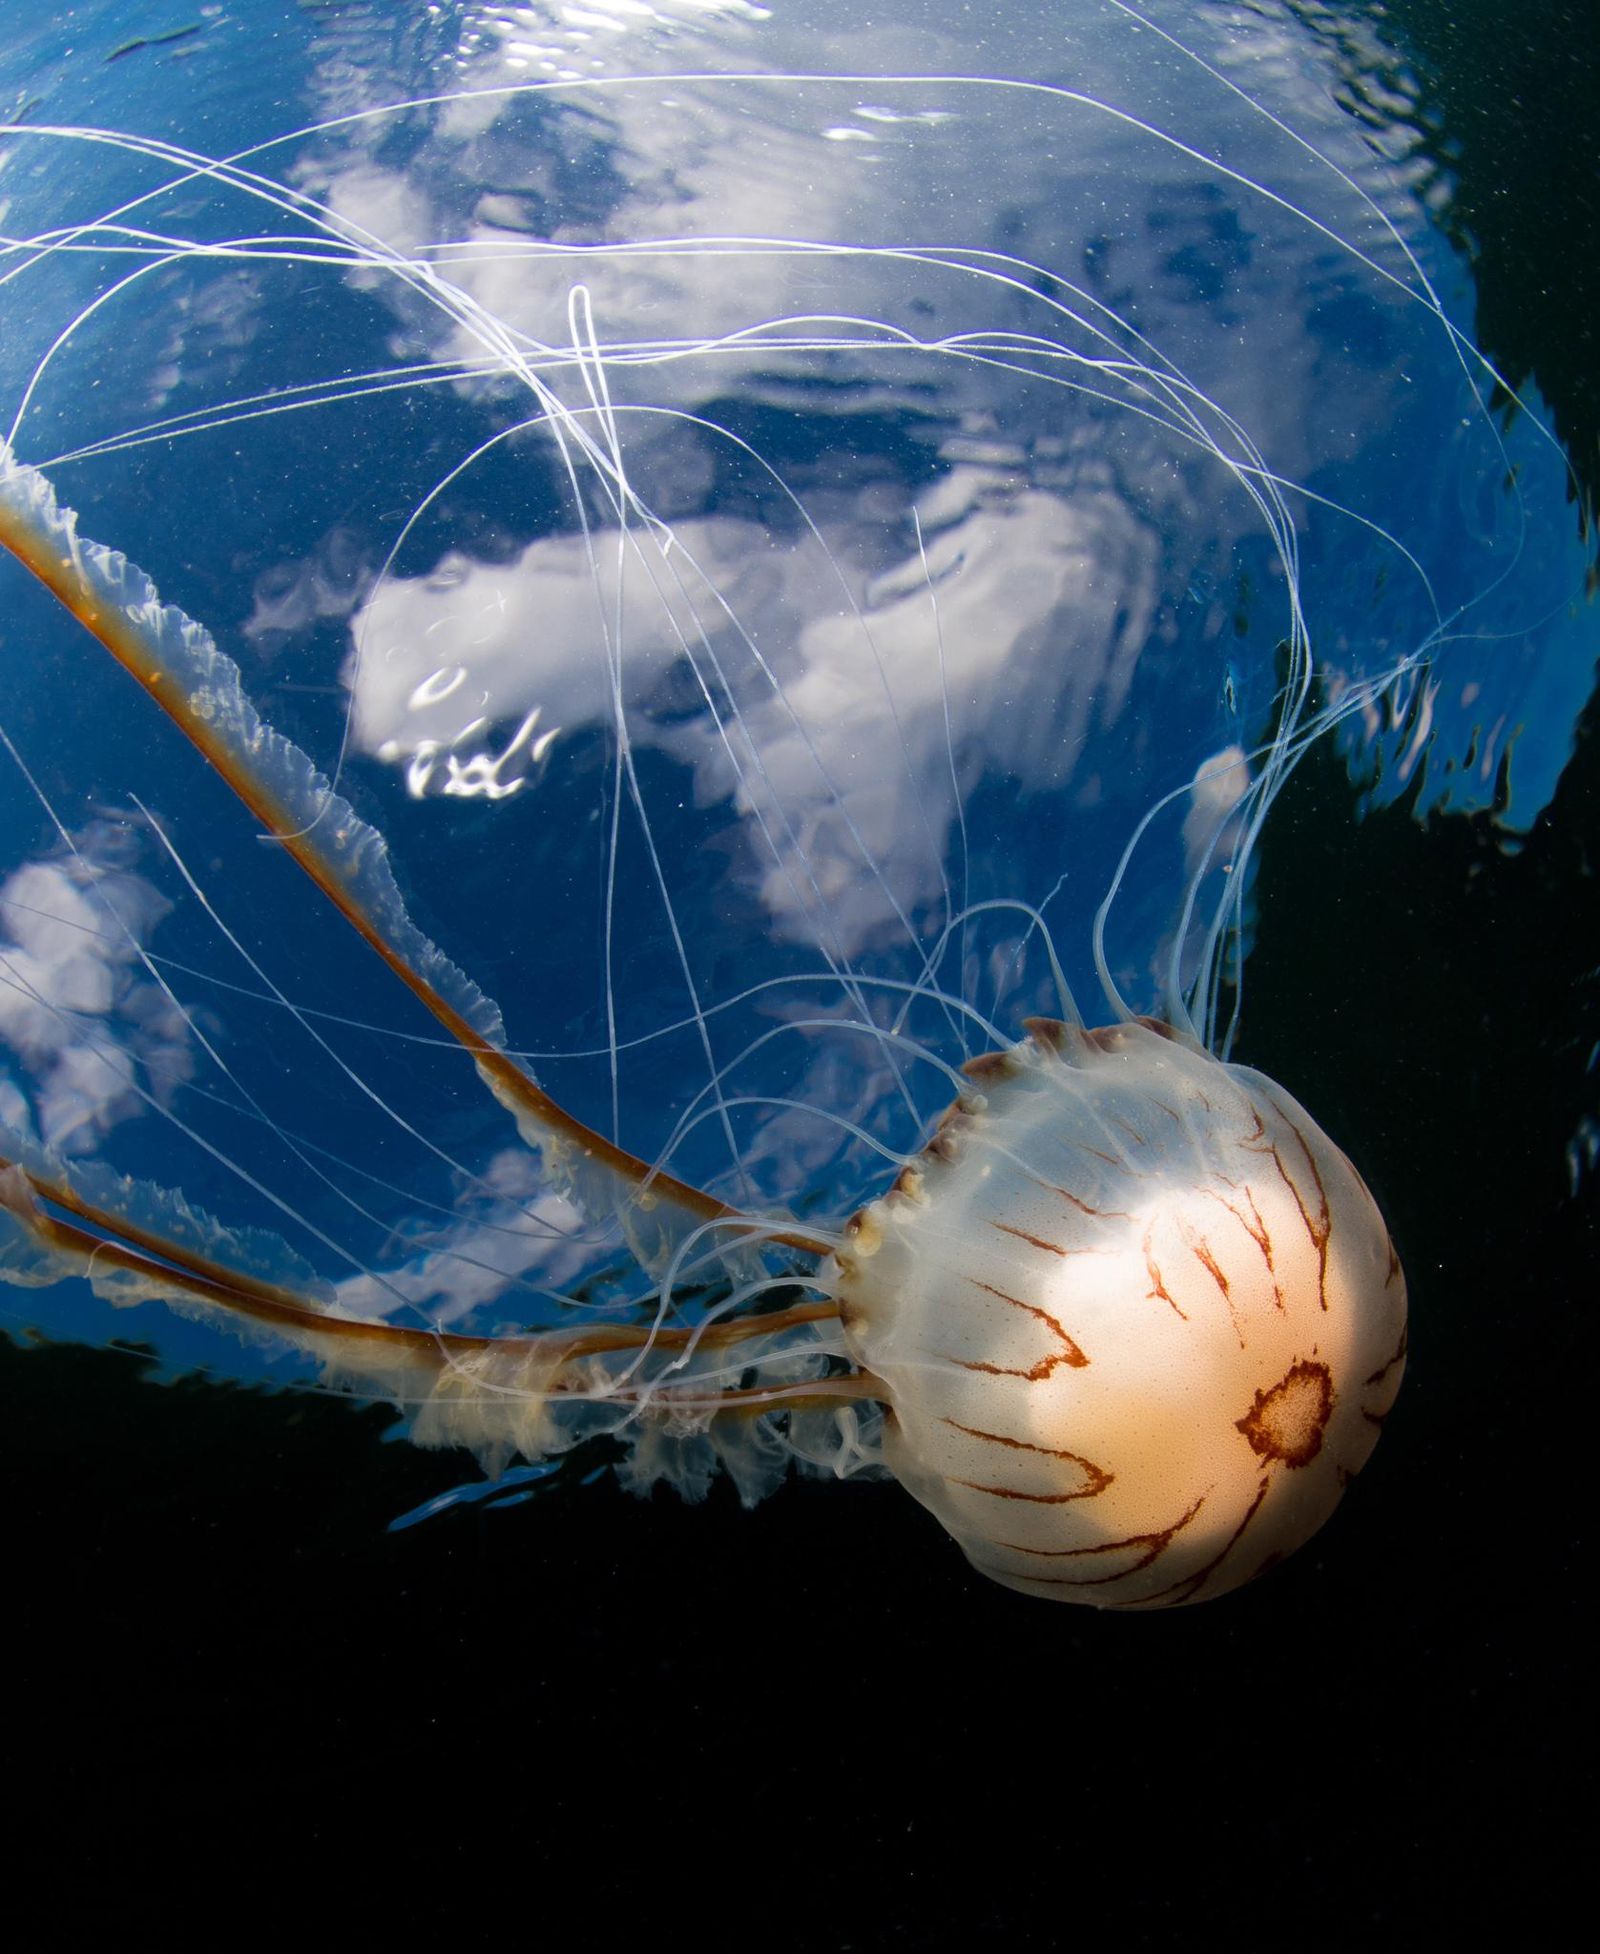 Compass Jellyfish in Great Bay, Isles of Scilly